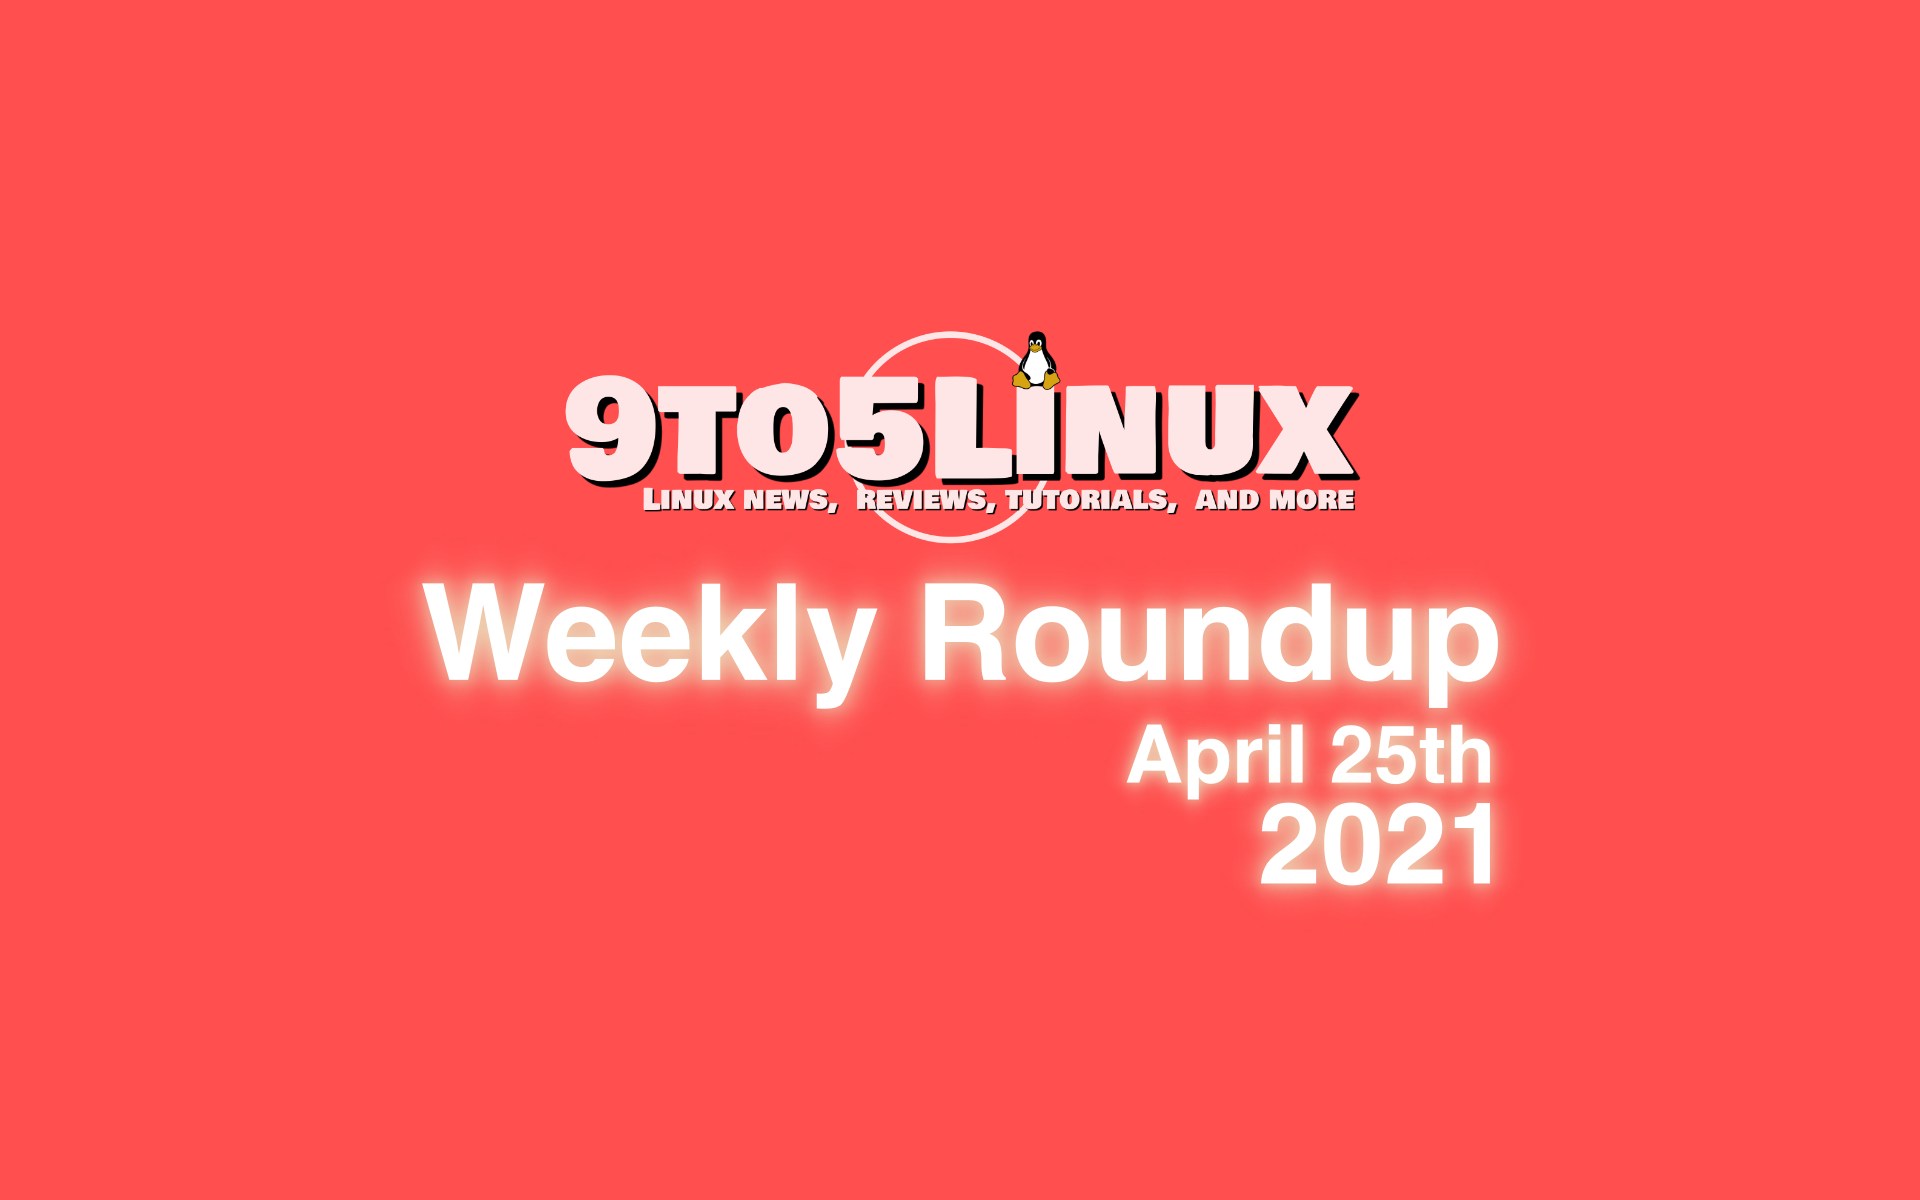 9to5Linux Weekly Roundup: April 25th, 2021